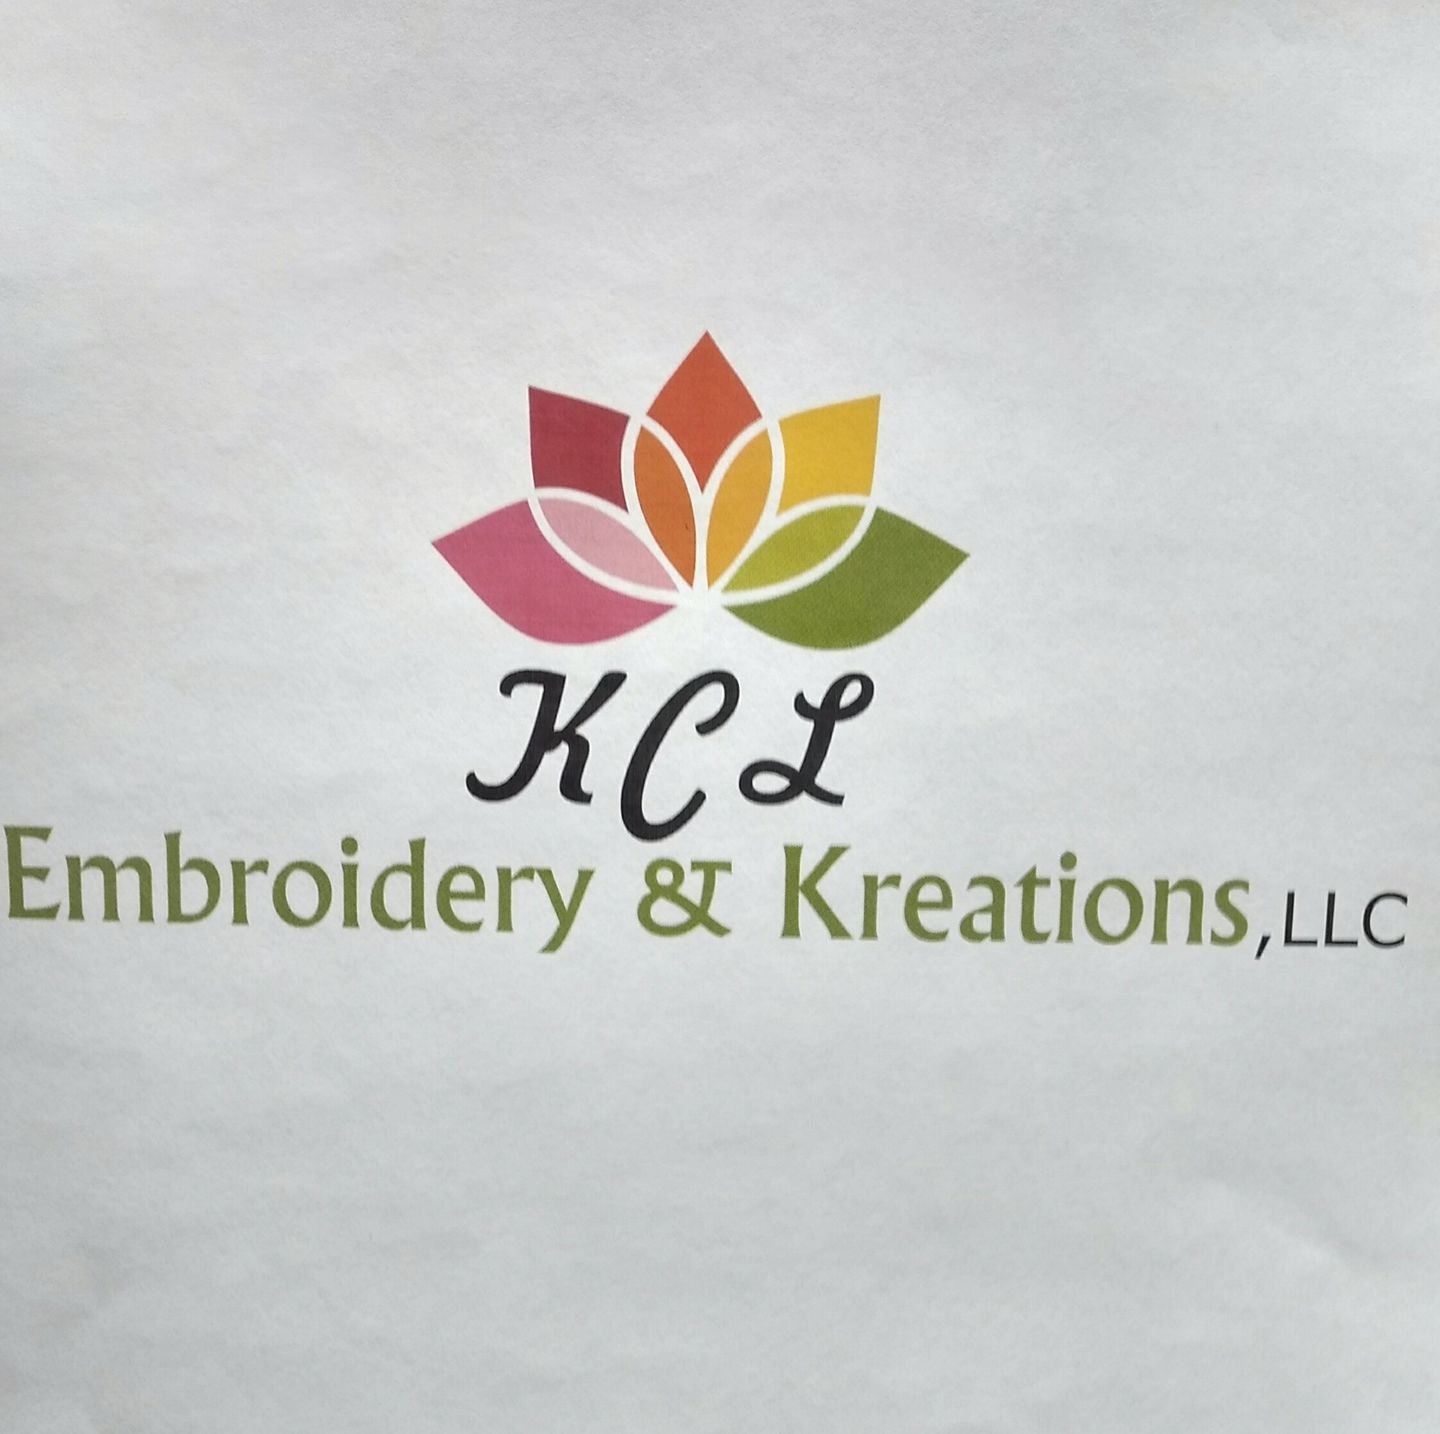 KCL Embroidery & Kreations